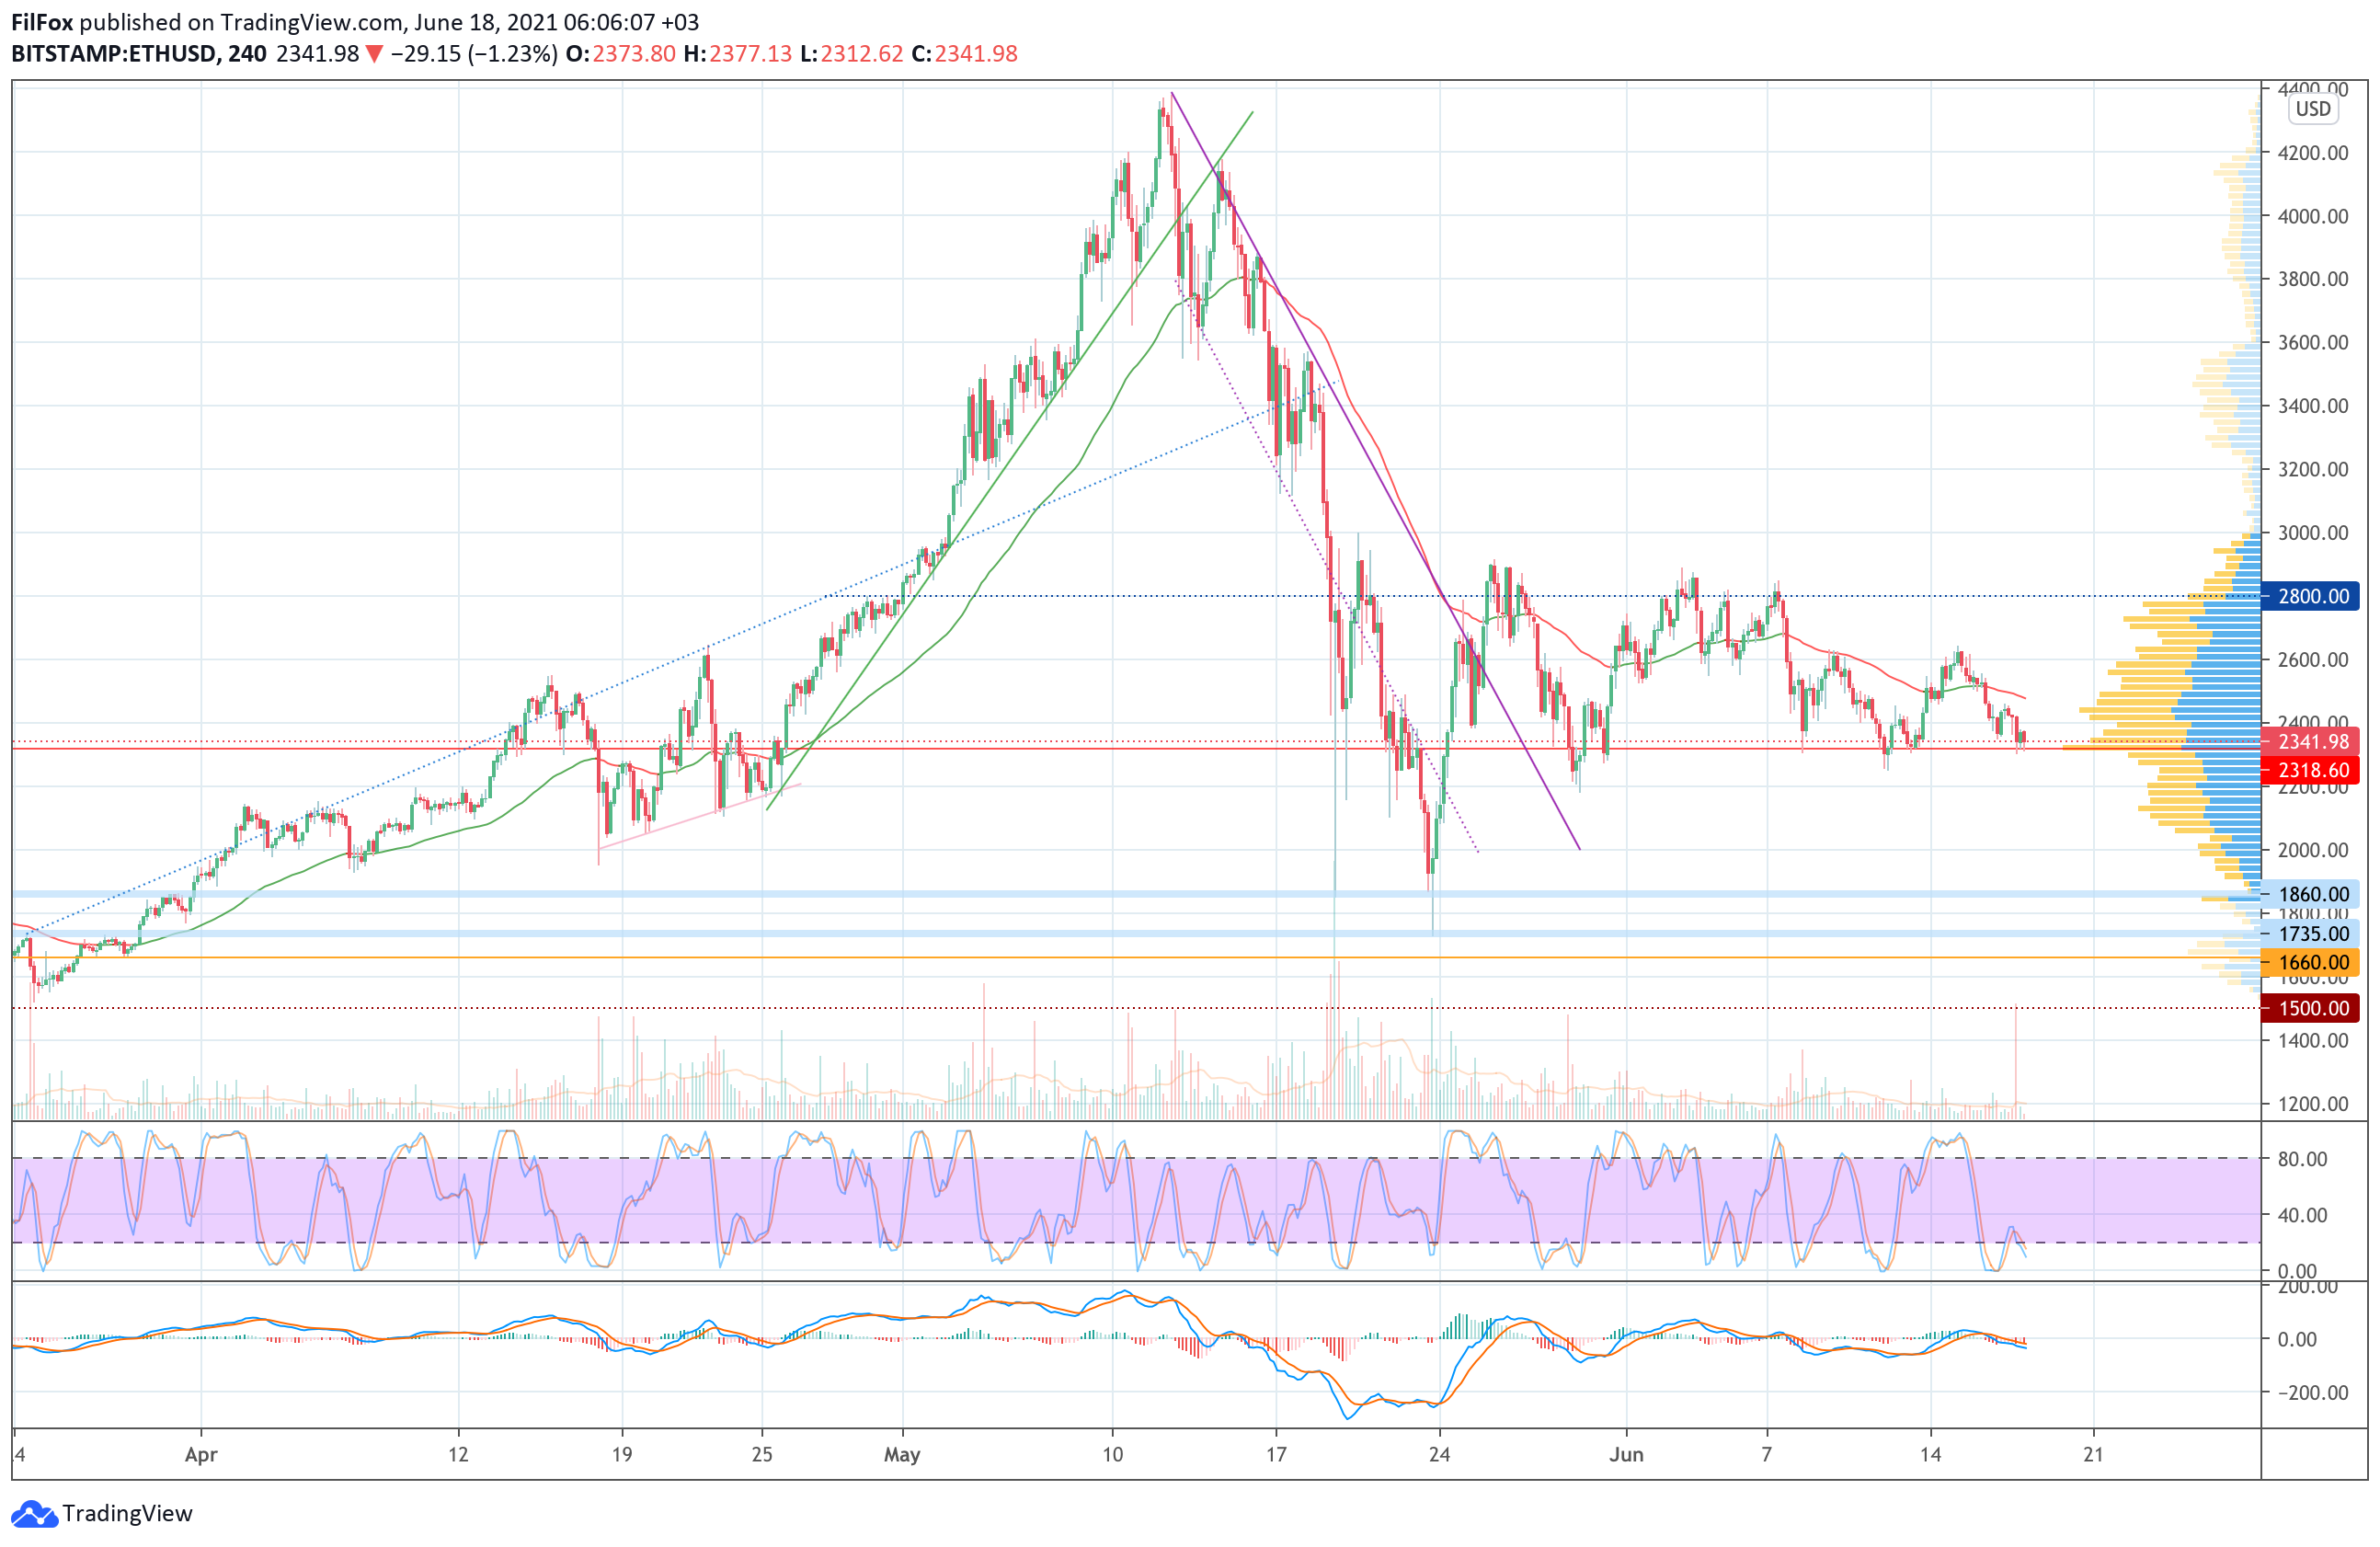 Analysis of the prices of Bitcoin, Ethereum, XRP for 06/18/2021